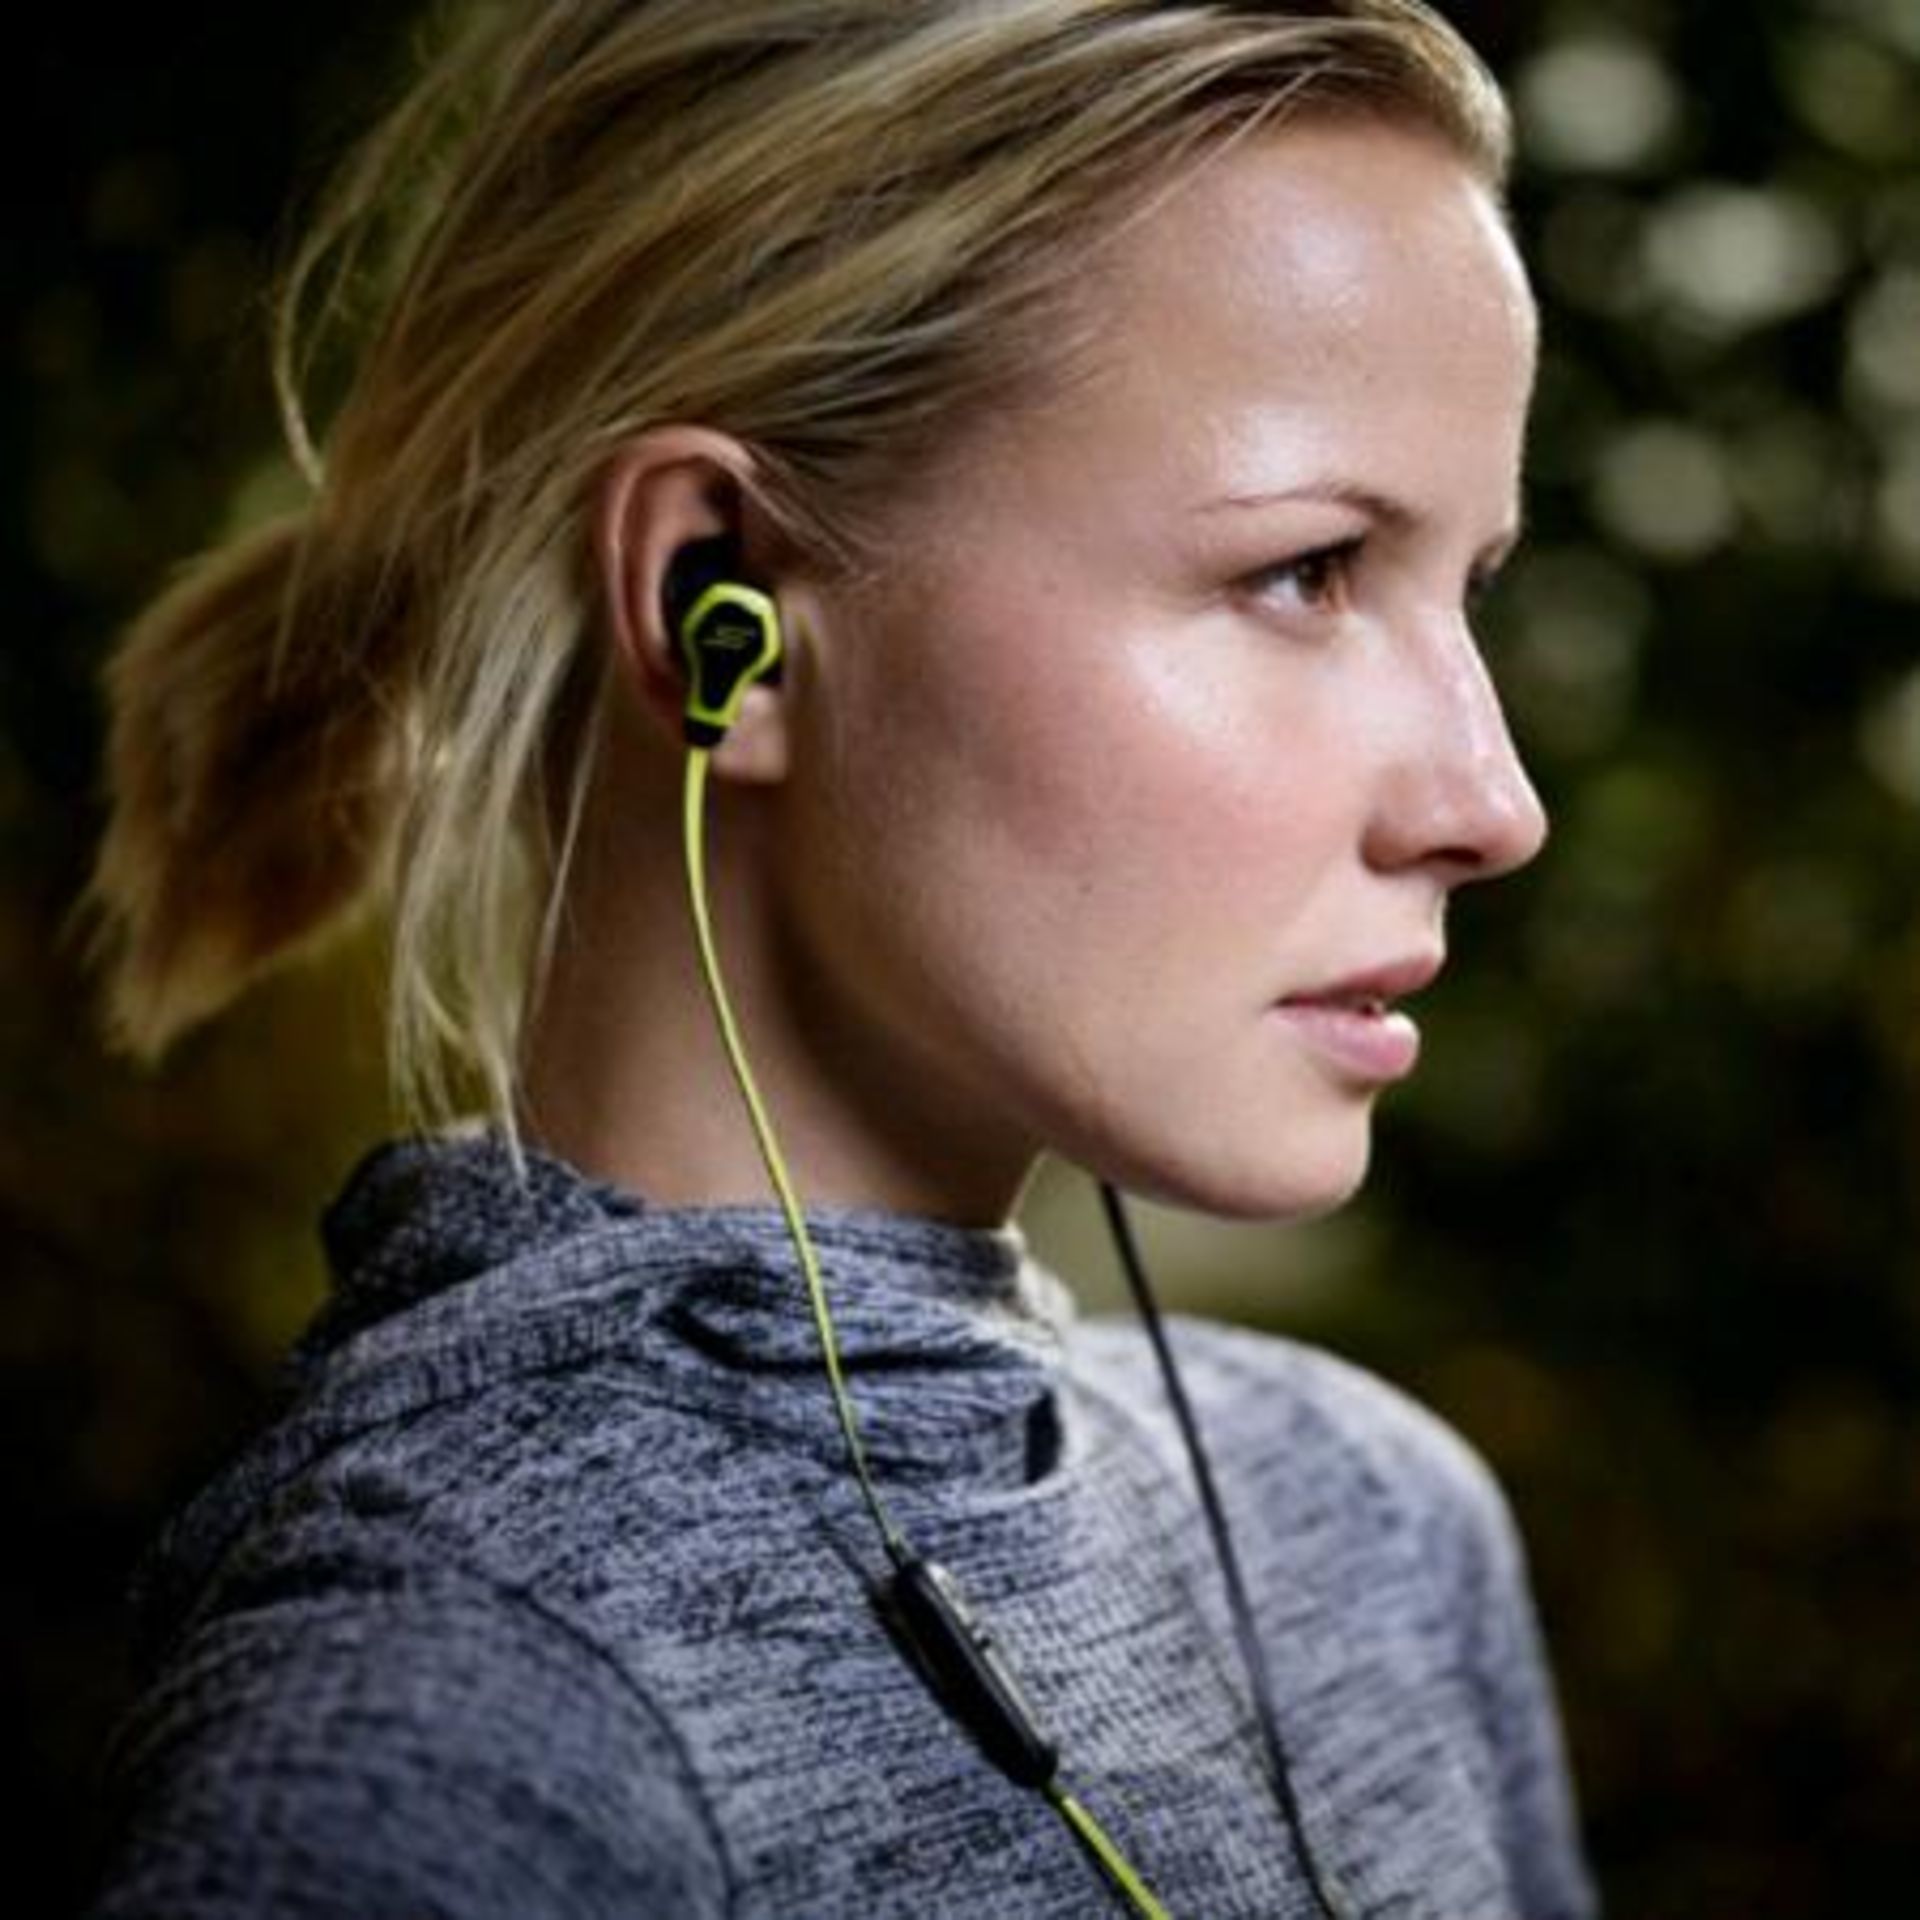 V *TRADE QTY* Brand New SMS Audio BioSport Earphones - Heart Rate Monitor Measures Changes In - Image 5 of 5